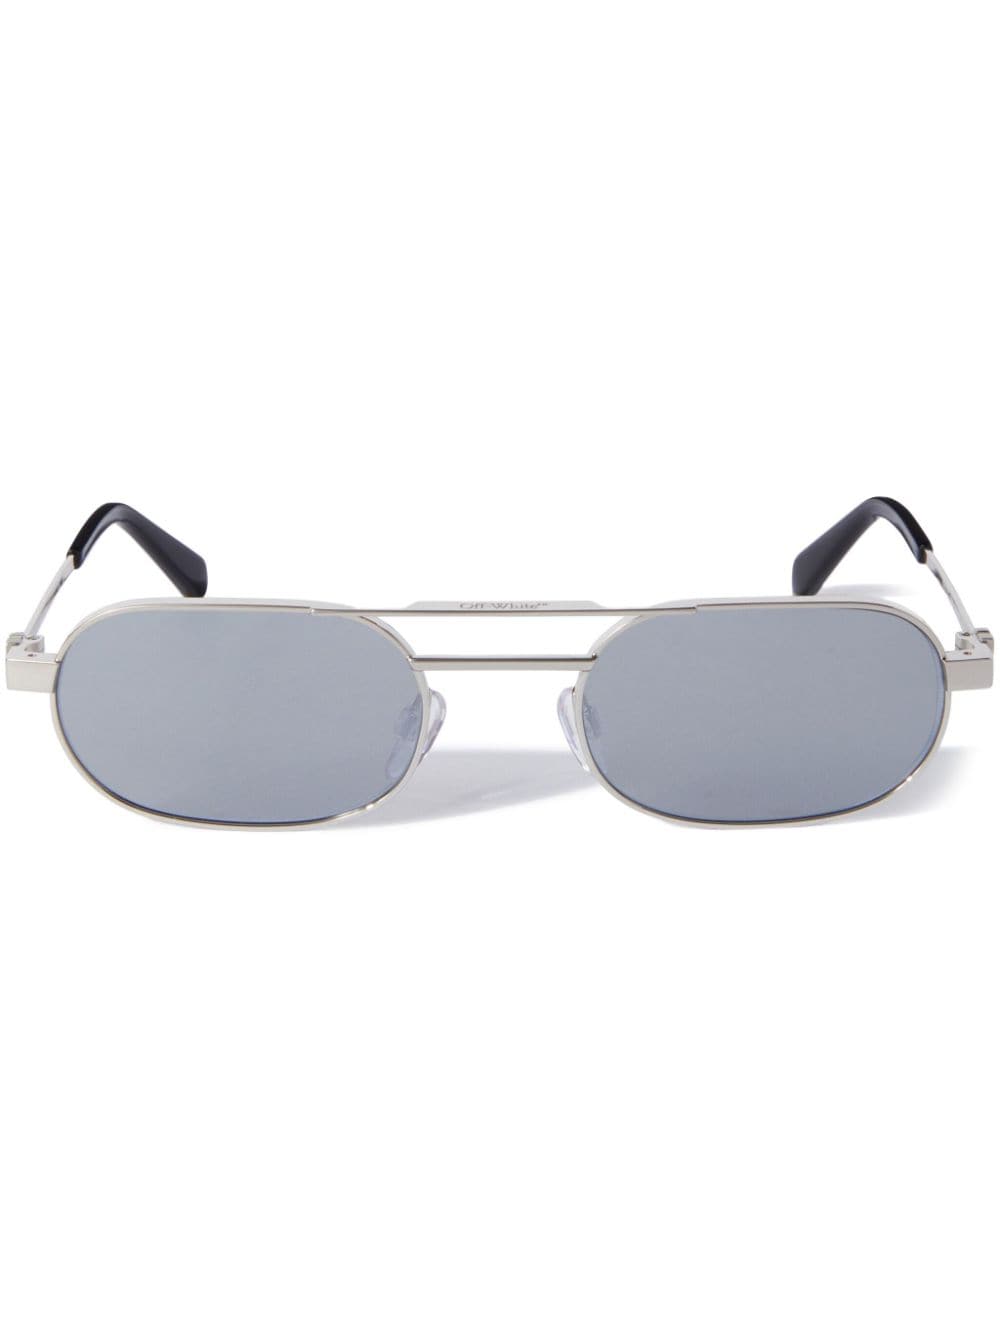 OFF-WHITE VAIDEN OVAL-FRAME SUNGLASSES